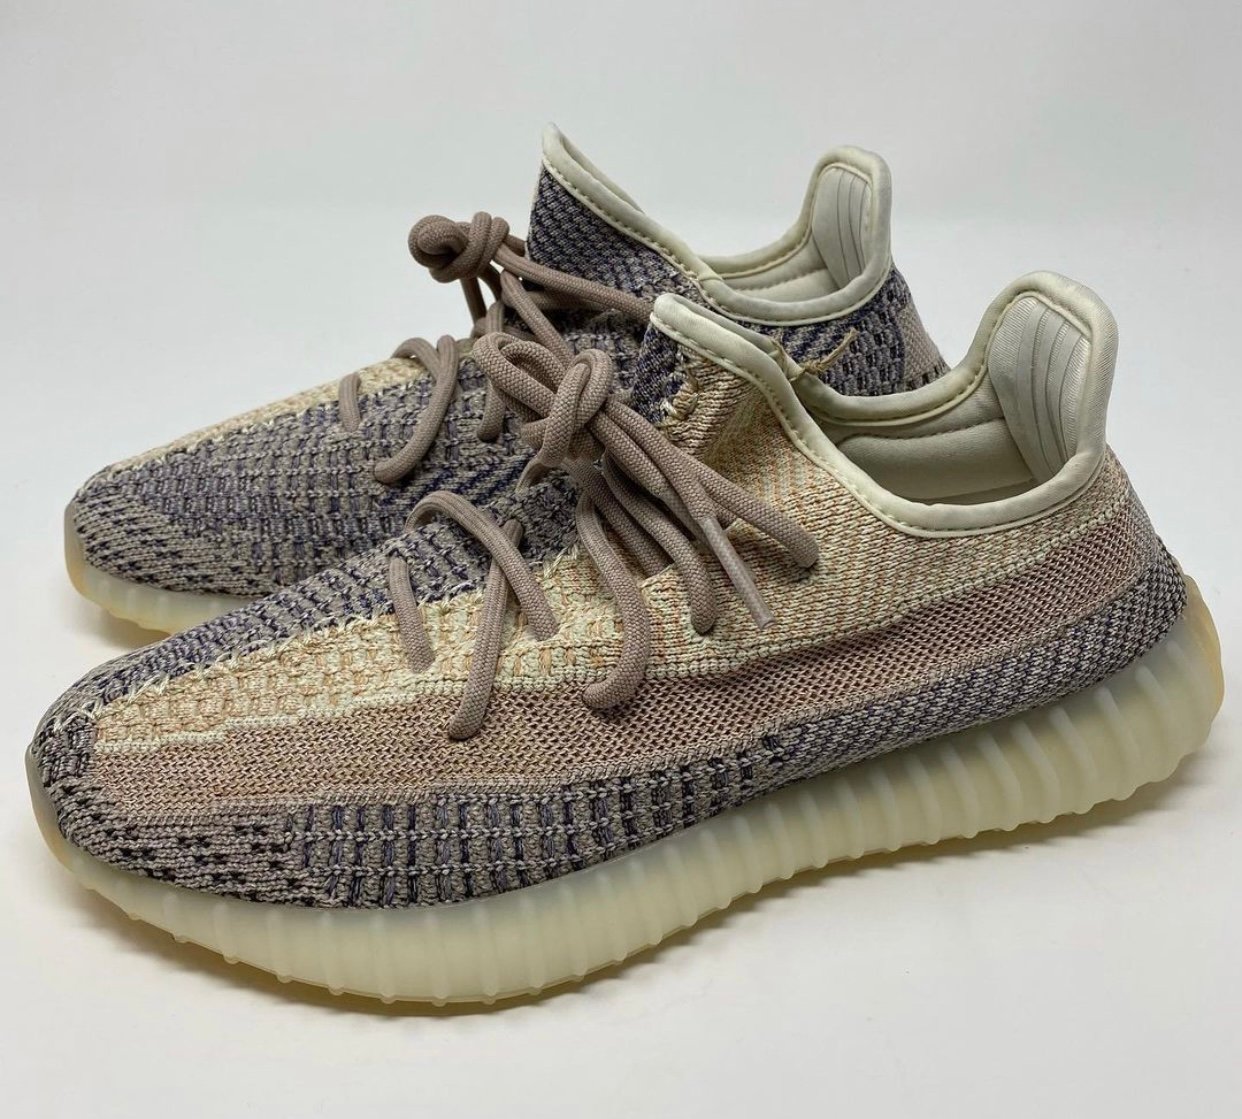 adidas yeezy boost 350 v2 ash pearl GY7658 release info